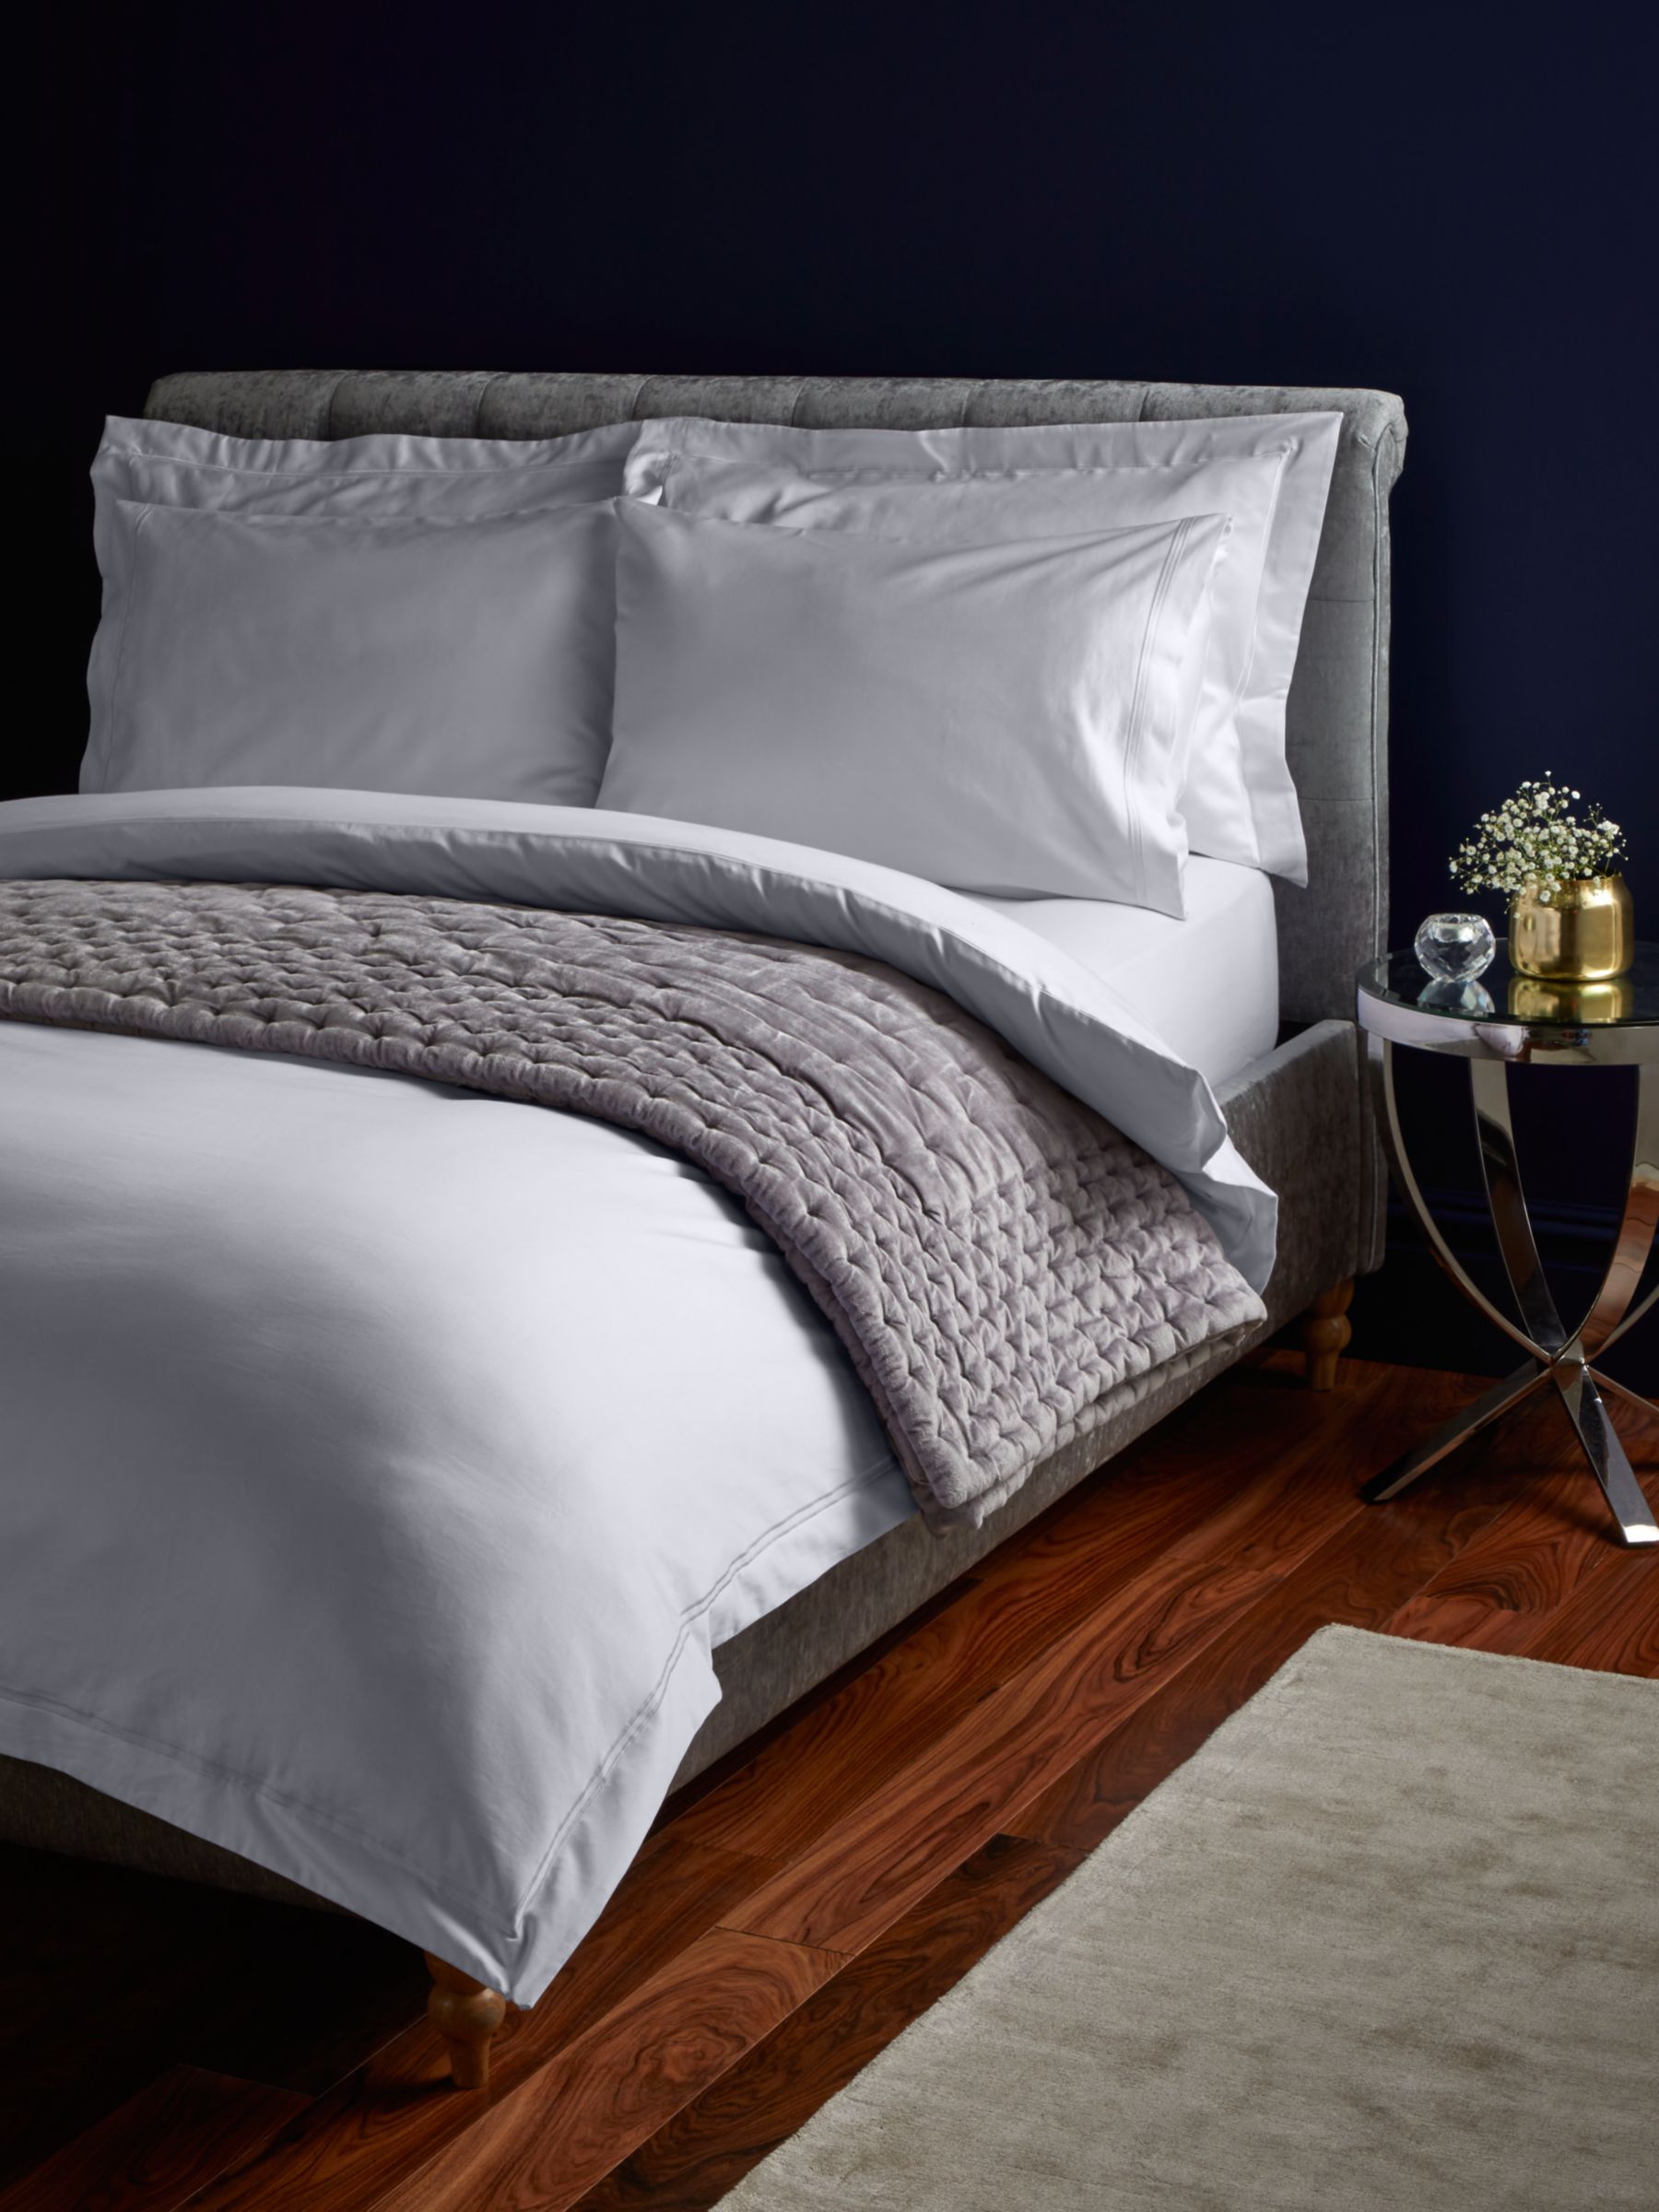 1600 Thread Count Cotton Bedding White, What Is A High Thread Count For Duvet Cover